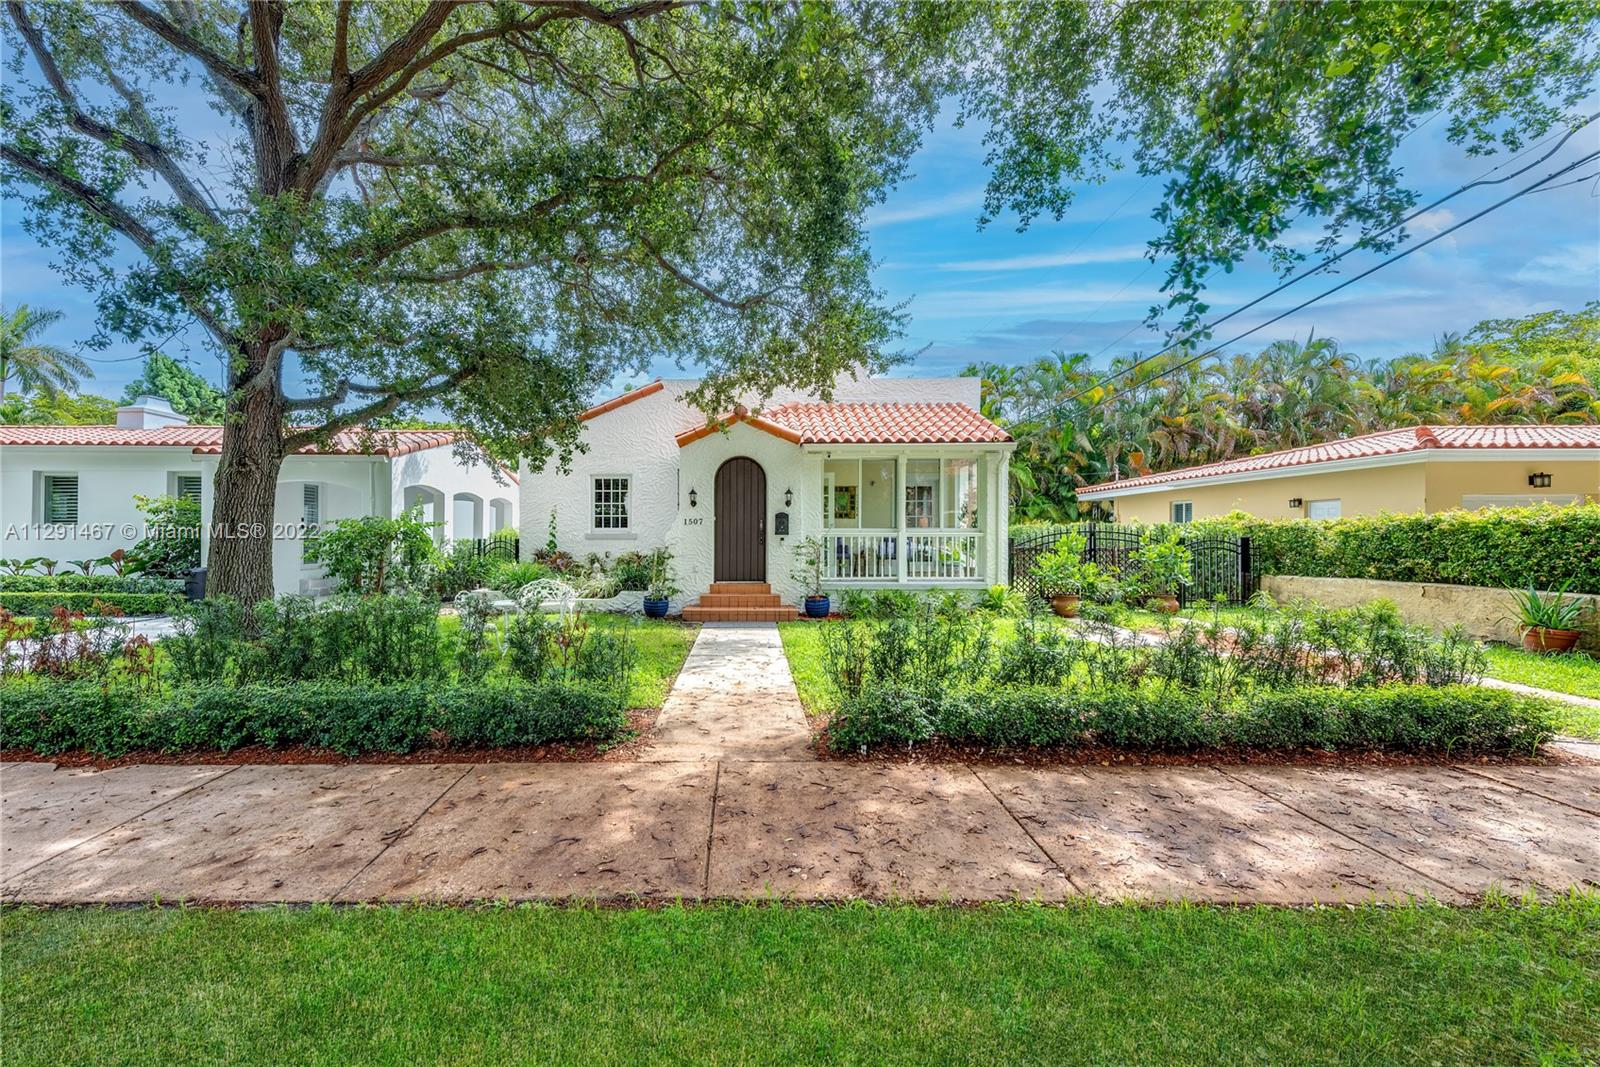 Charming 1920s home designed by George Fink, for the founder of Coral Gables' Merrick's development office. Recently updated, this gorgeous home features large rooms, 9½ ft ceilings & plenty of sunlight through newer impact windows/doors. New AC . Formal DR, Large eat-in kitchen has new appliances; granite counters. 4 bdrms/3 baths. Spacious master suite has 10-ft ceiling & updated bath w/double vanity & clawfoot soaking tub. Plantation shutters & crown moldings throughout, formal foyer & sunroom with original mosaic tiles, Wood-burning fireplace in living room.. Family room in rear. Garage converted to the 4th bedroom with en-suite bathroom. Home is larger than tax roll, expanded to nearly 2400 sf. This home is well priced/easy to show.